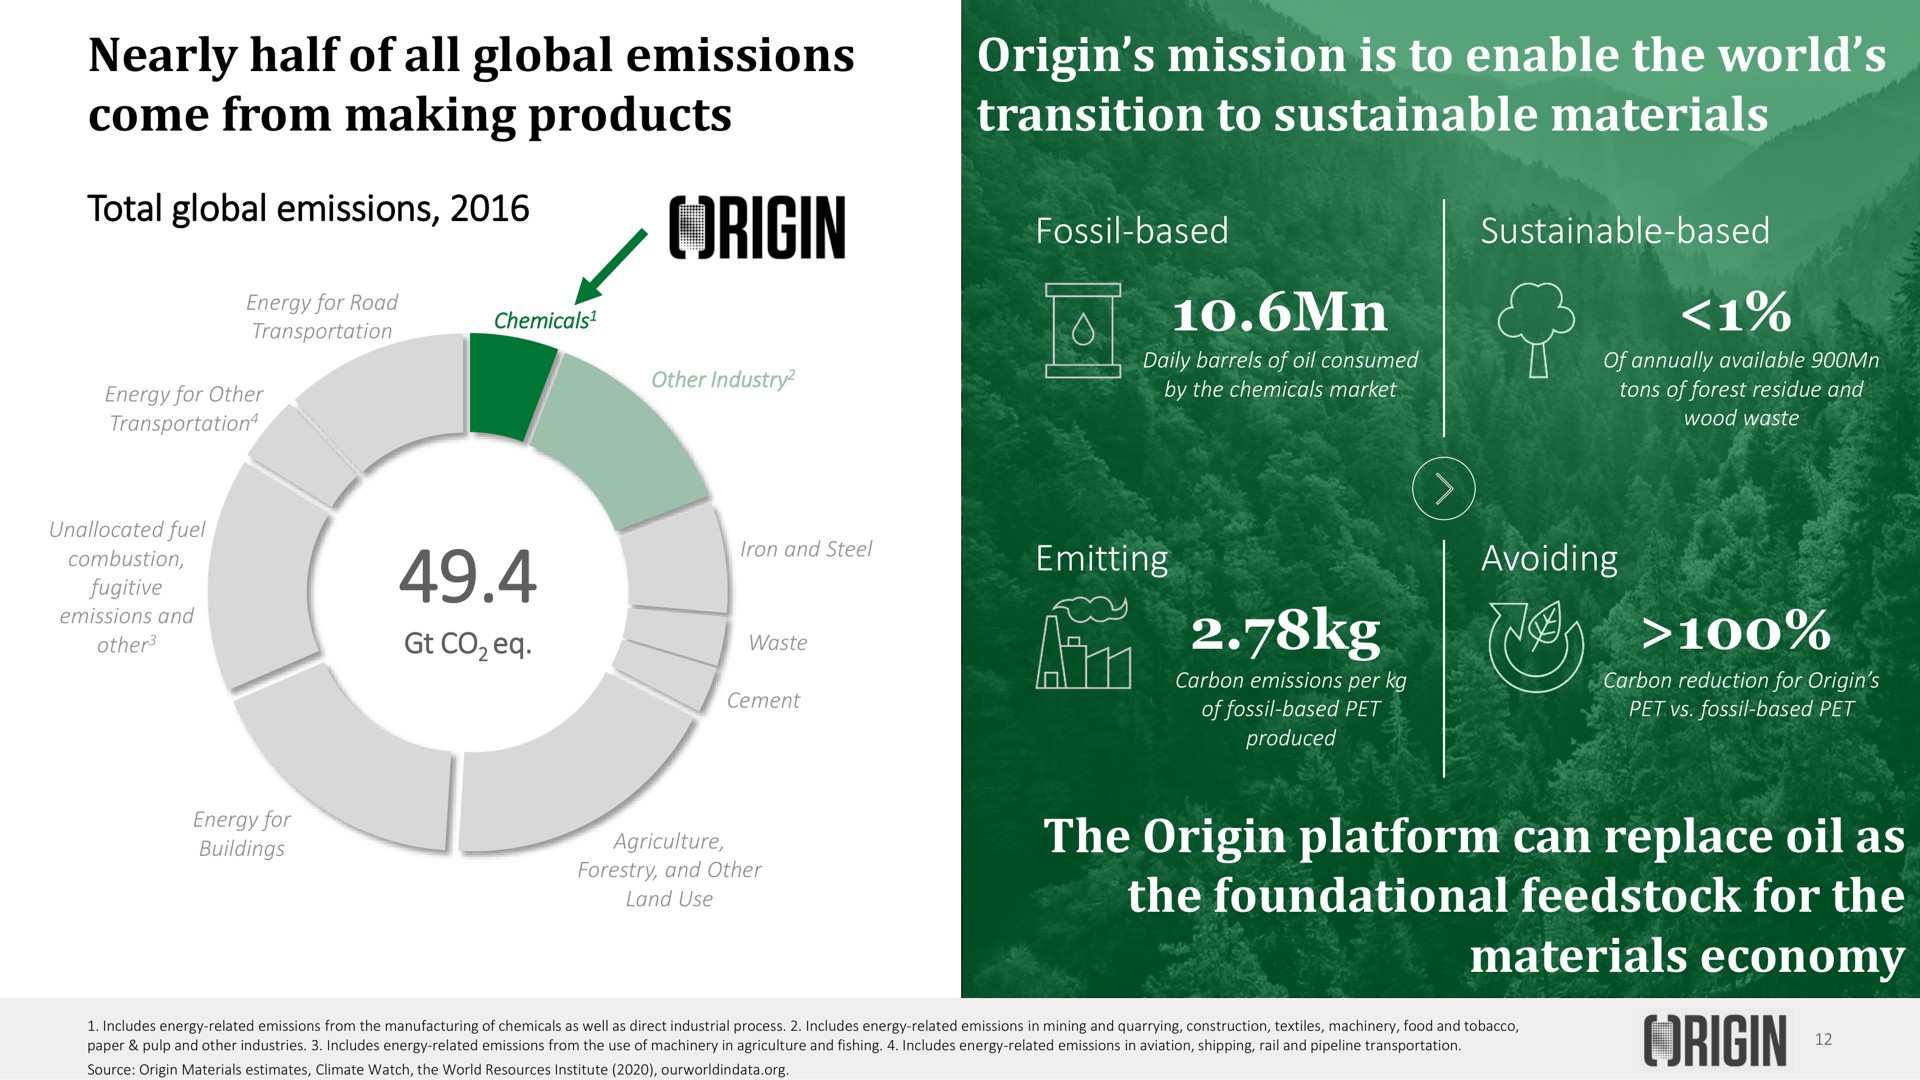 nearly half of all global emissions come from making products origin mission is to enable the world transition to sustainable materials the origin platform can replace oil as the foundational for the materials economy i | Origin